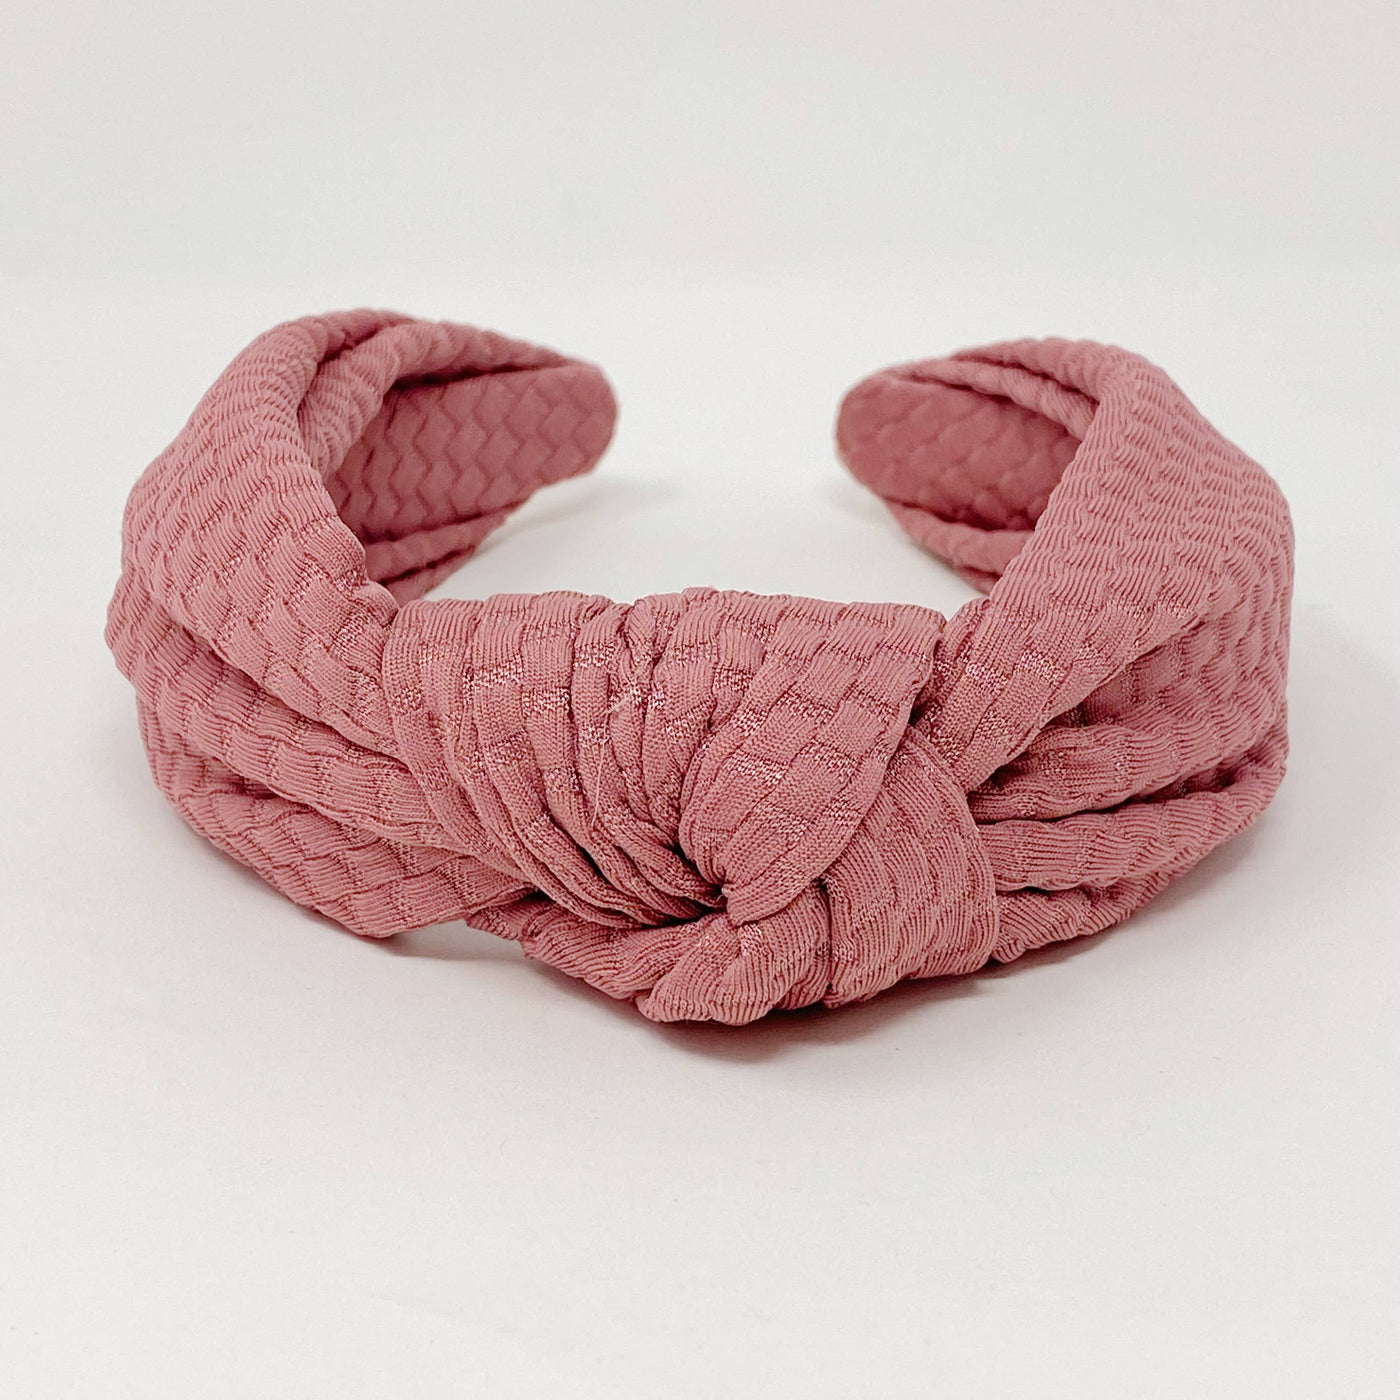 Embossed Charm Knotted Headbands